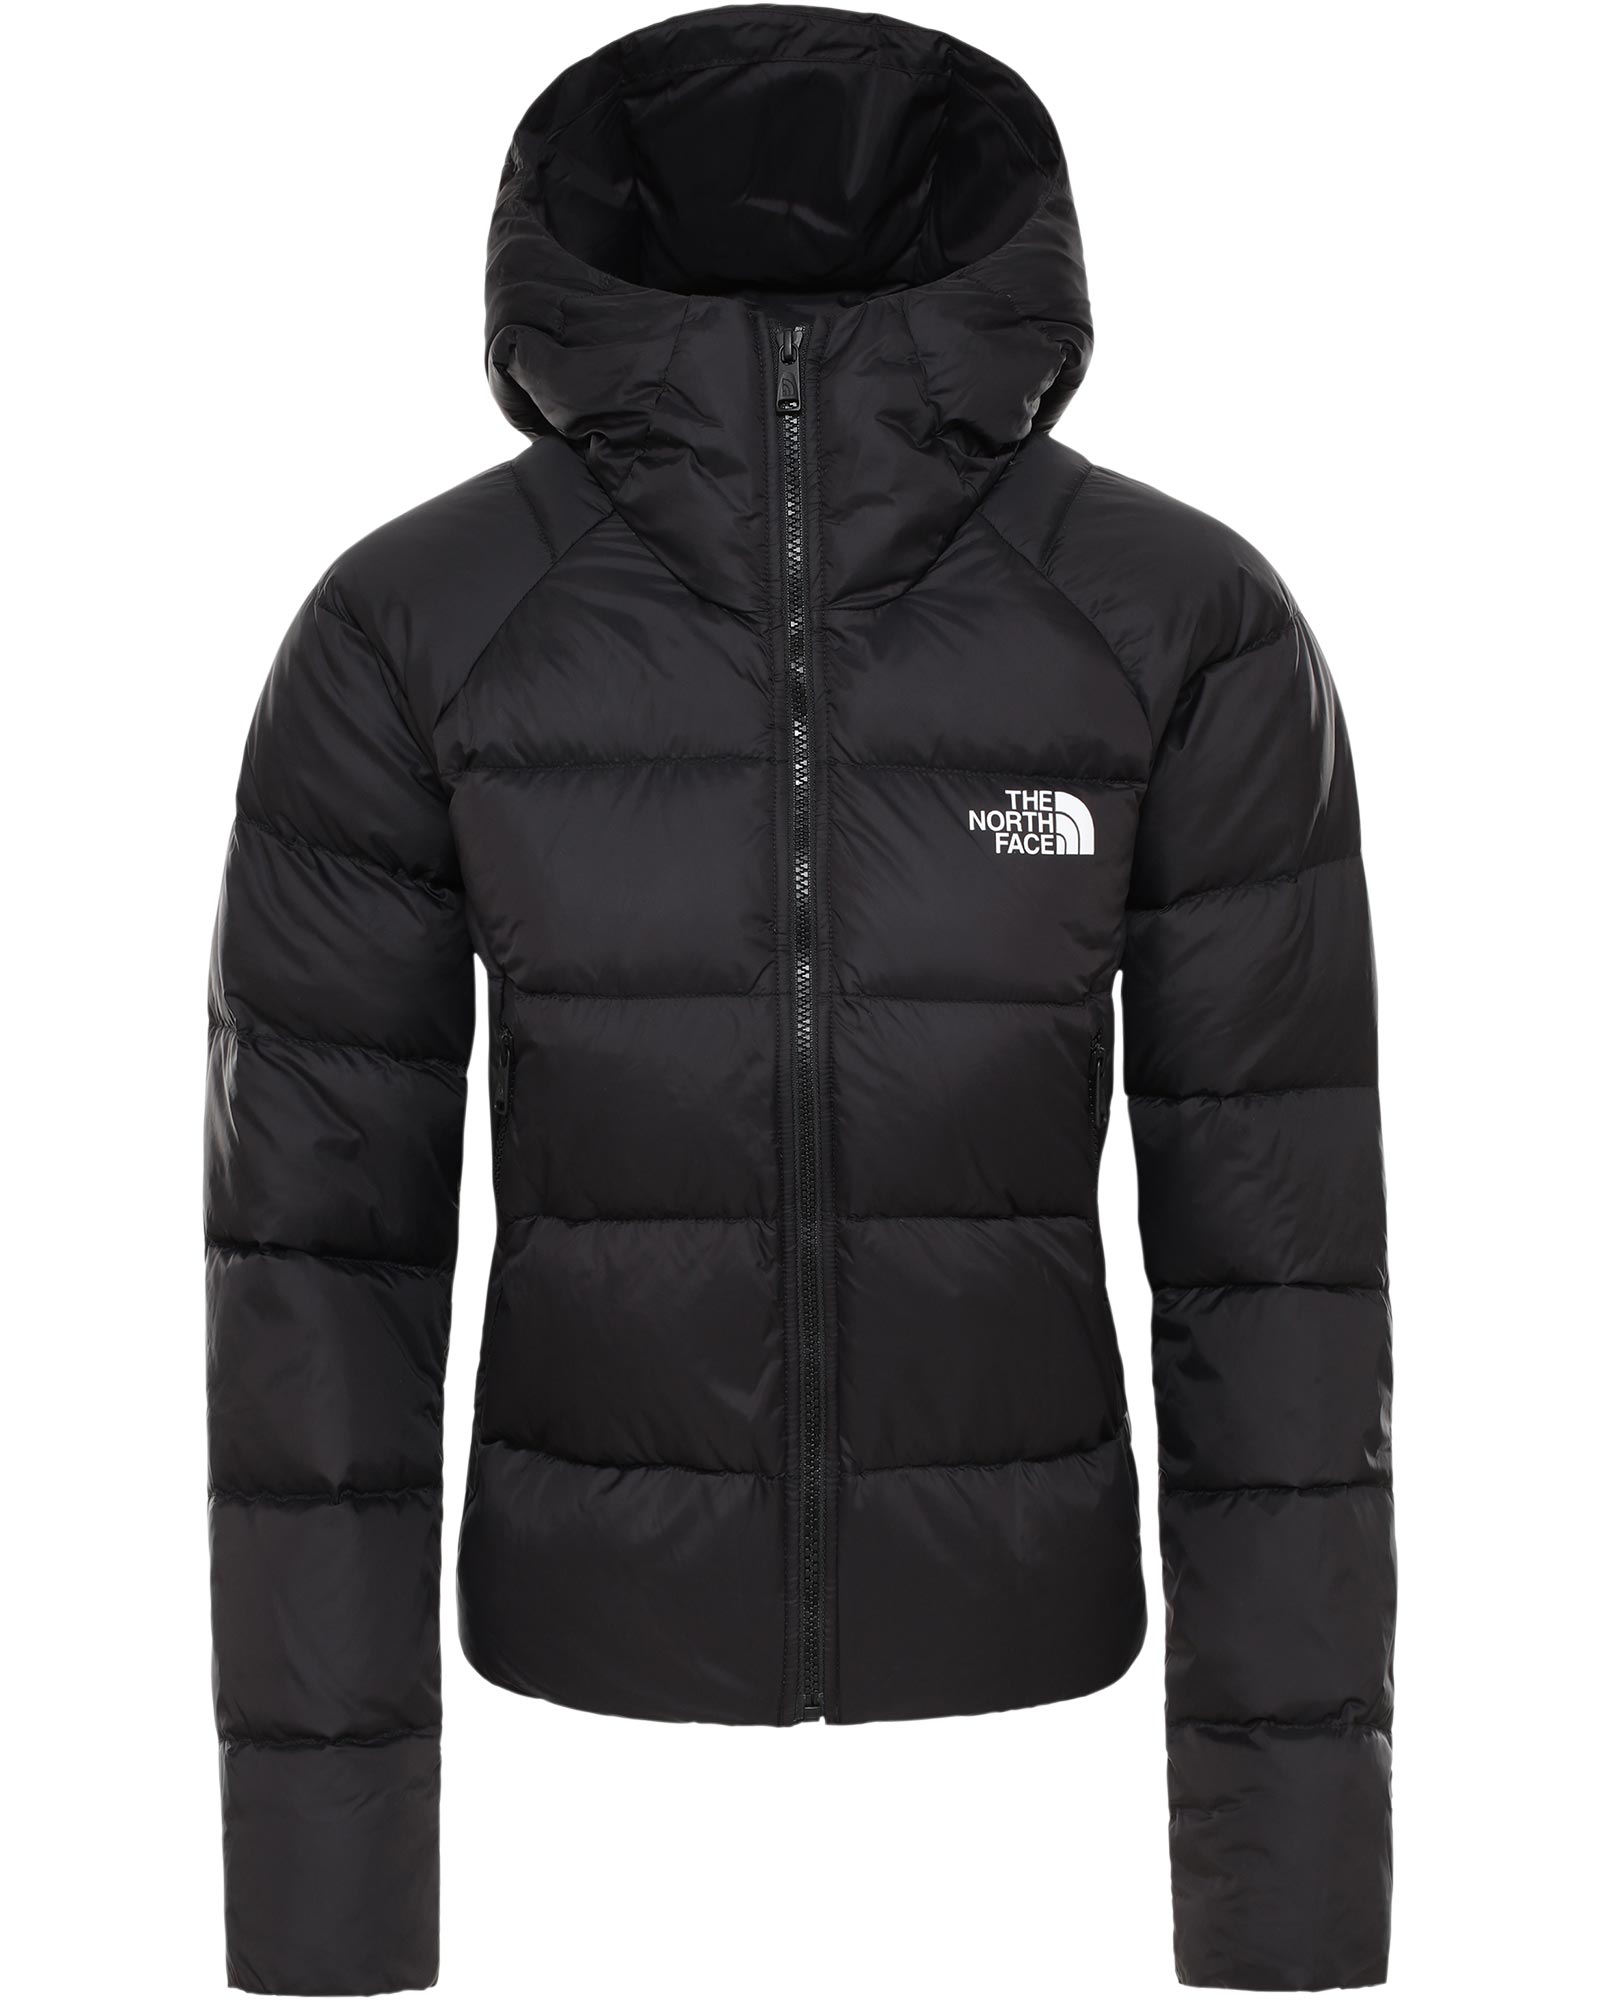 The North Face Hyalite Women’s Down Hoodie - TNF Black M